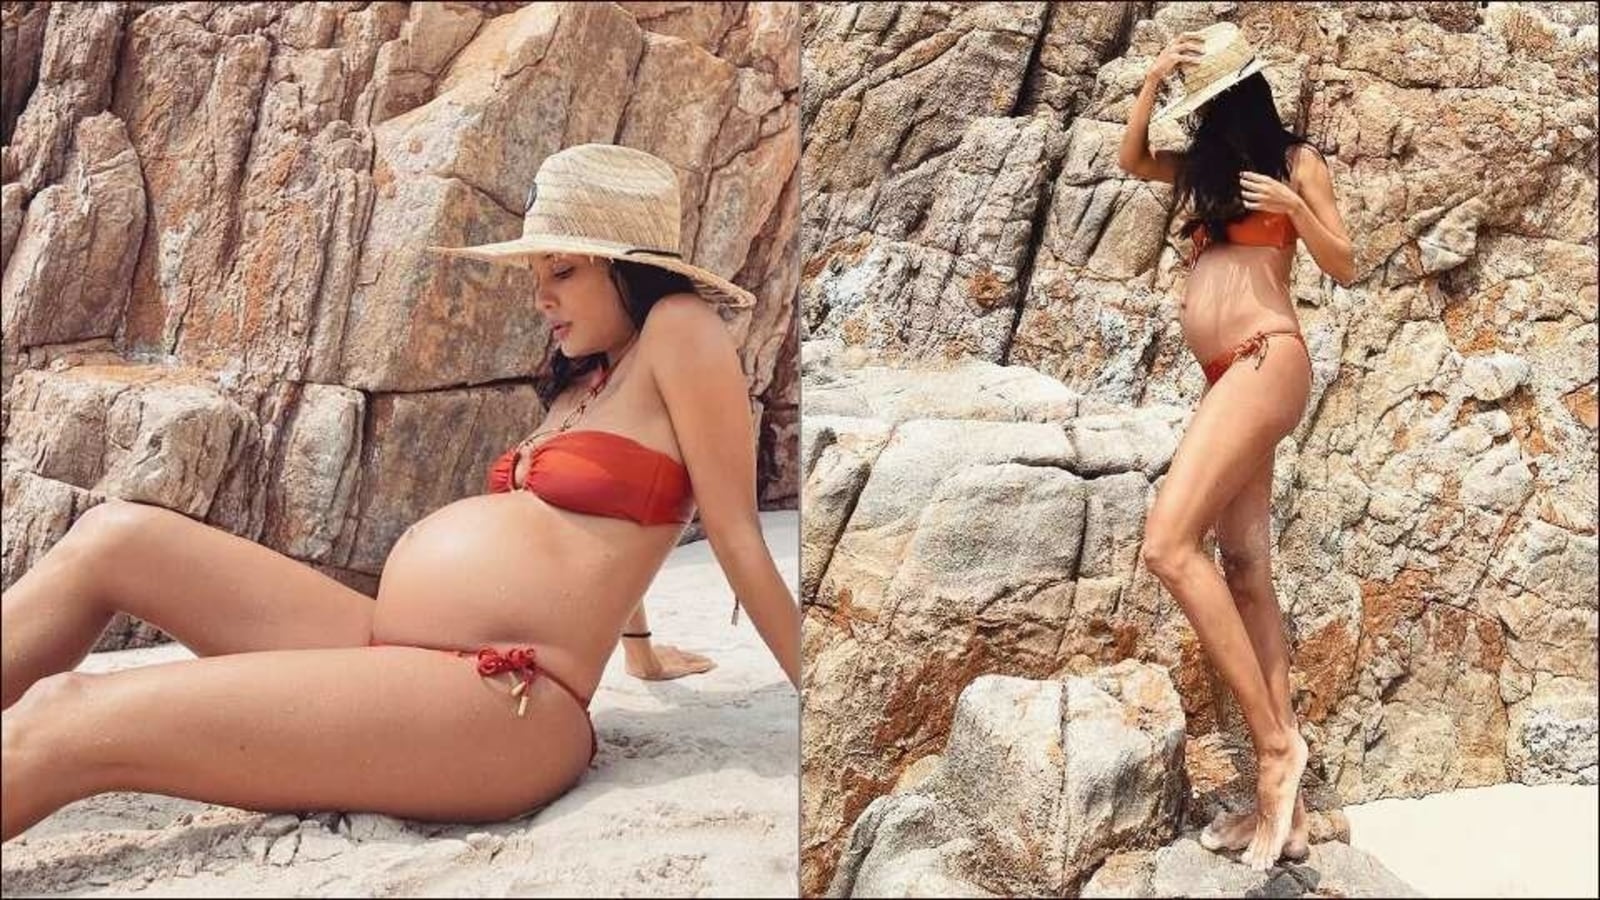 Candid Beach Nudes - Third time pregnant Lisa Haydon sets Internet ablaze with her 'Beach bod  2021' | Fashion Trends - Hindustan Times